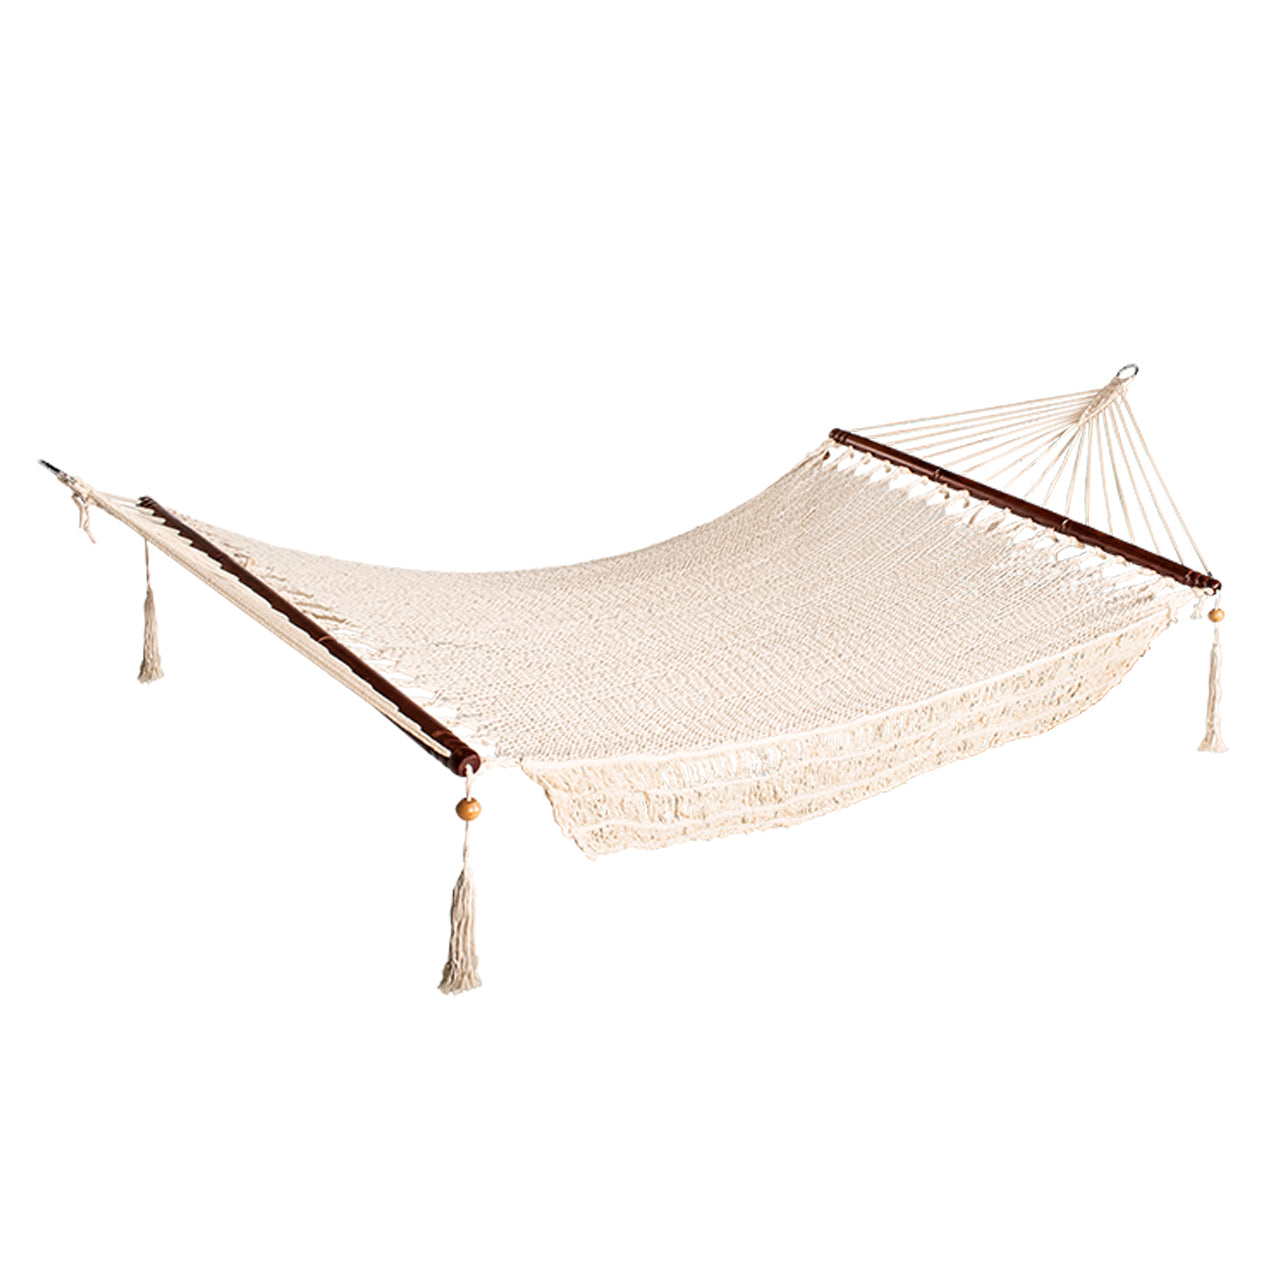 Bliss Hammocks 48-inch Wide Island Rope Hammock with Spreader Bars, S Hooks, and Chains.